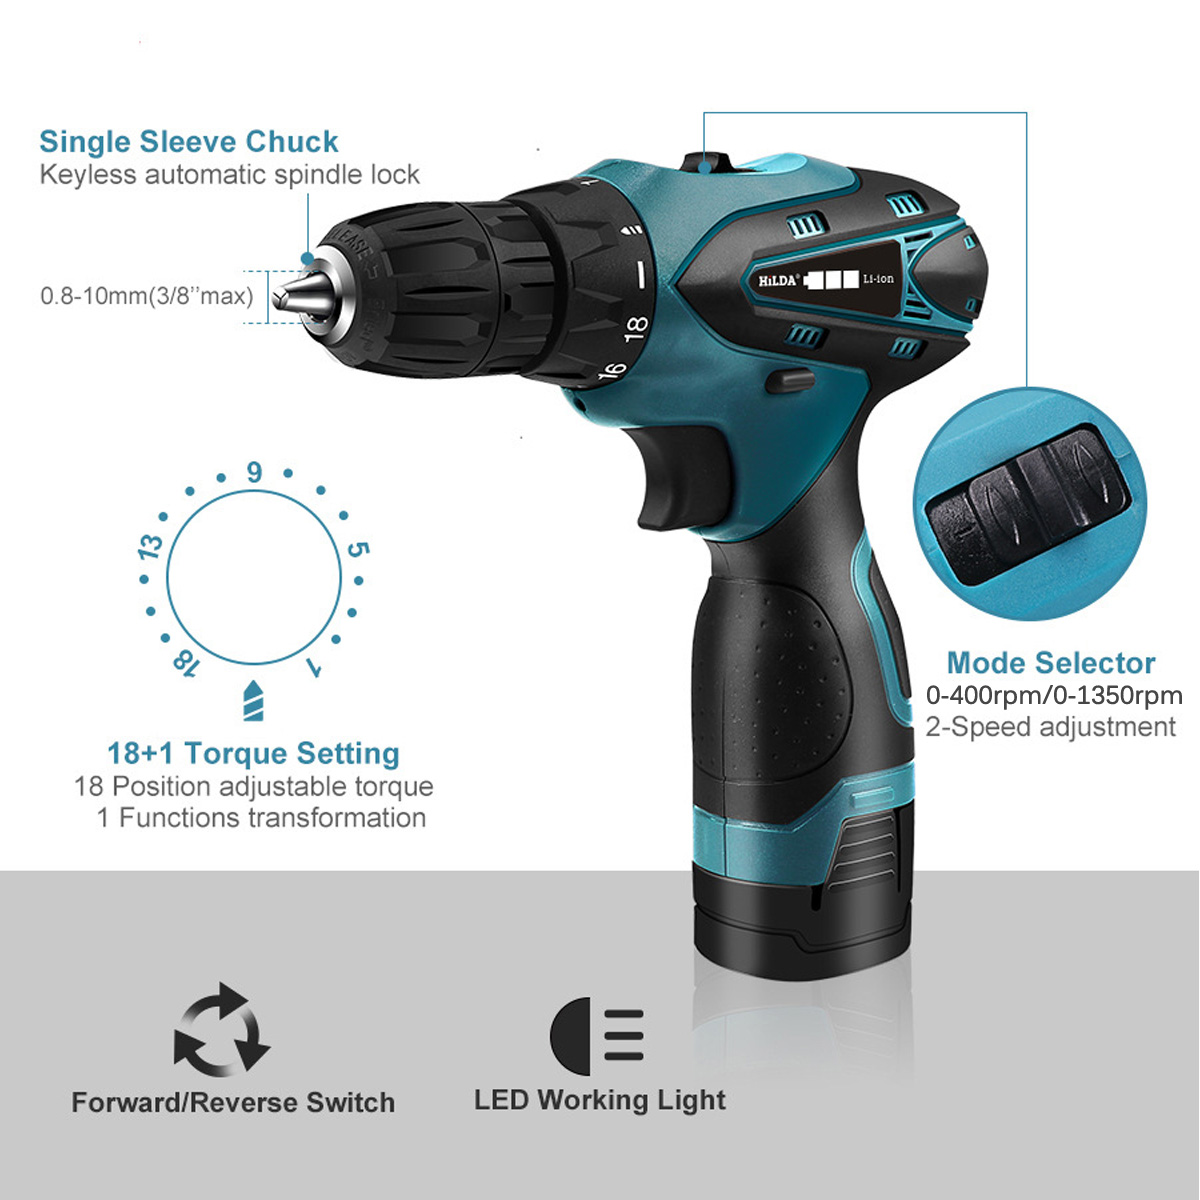 168V-Cordless-Electric-Drill-Driver-231-Torque-Multifuntional-Screwdriver-Power-Tool-W-Battery--Dril-1863336-4